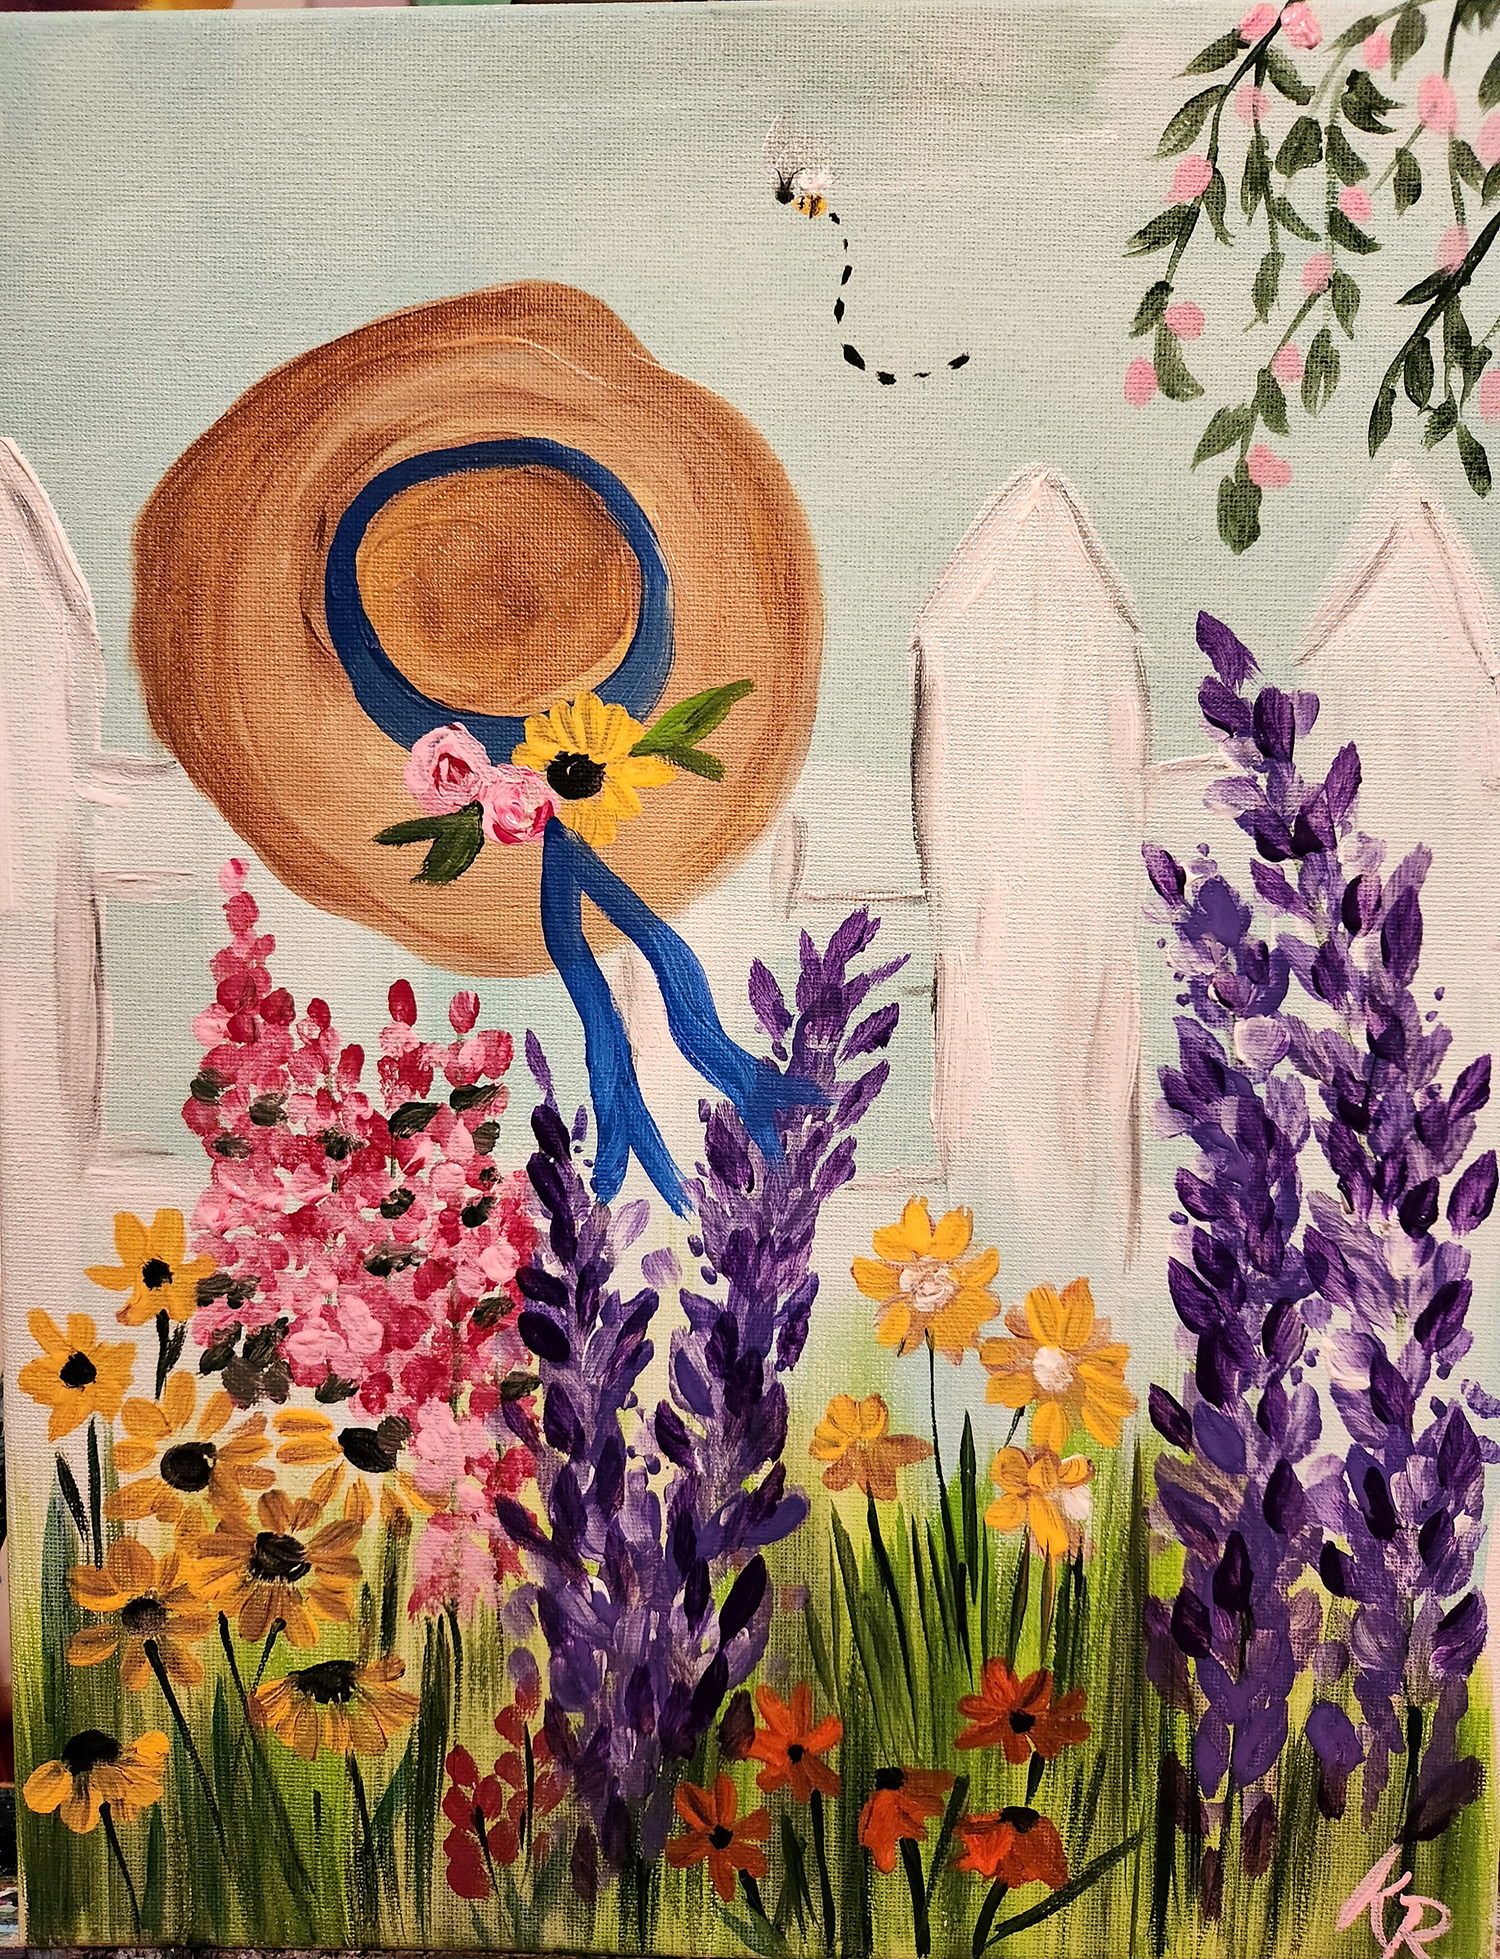 Image of an acrylic painting with flowers and a straw hat with a ribbon hanging on a fence.